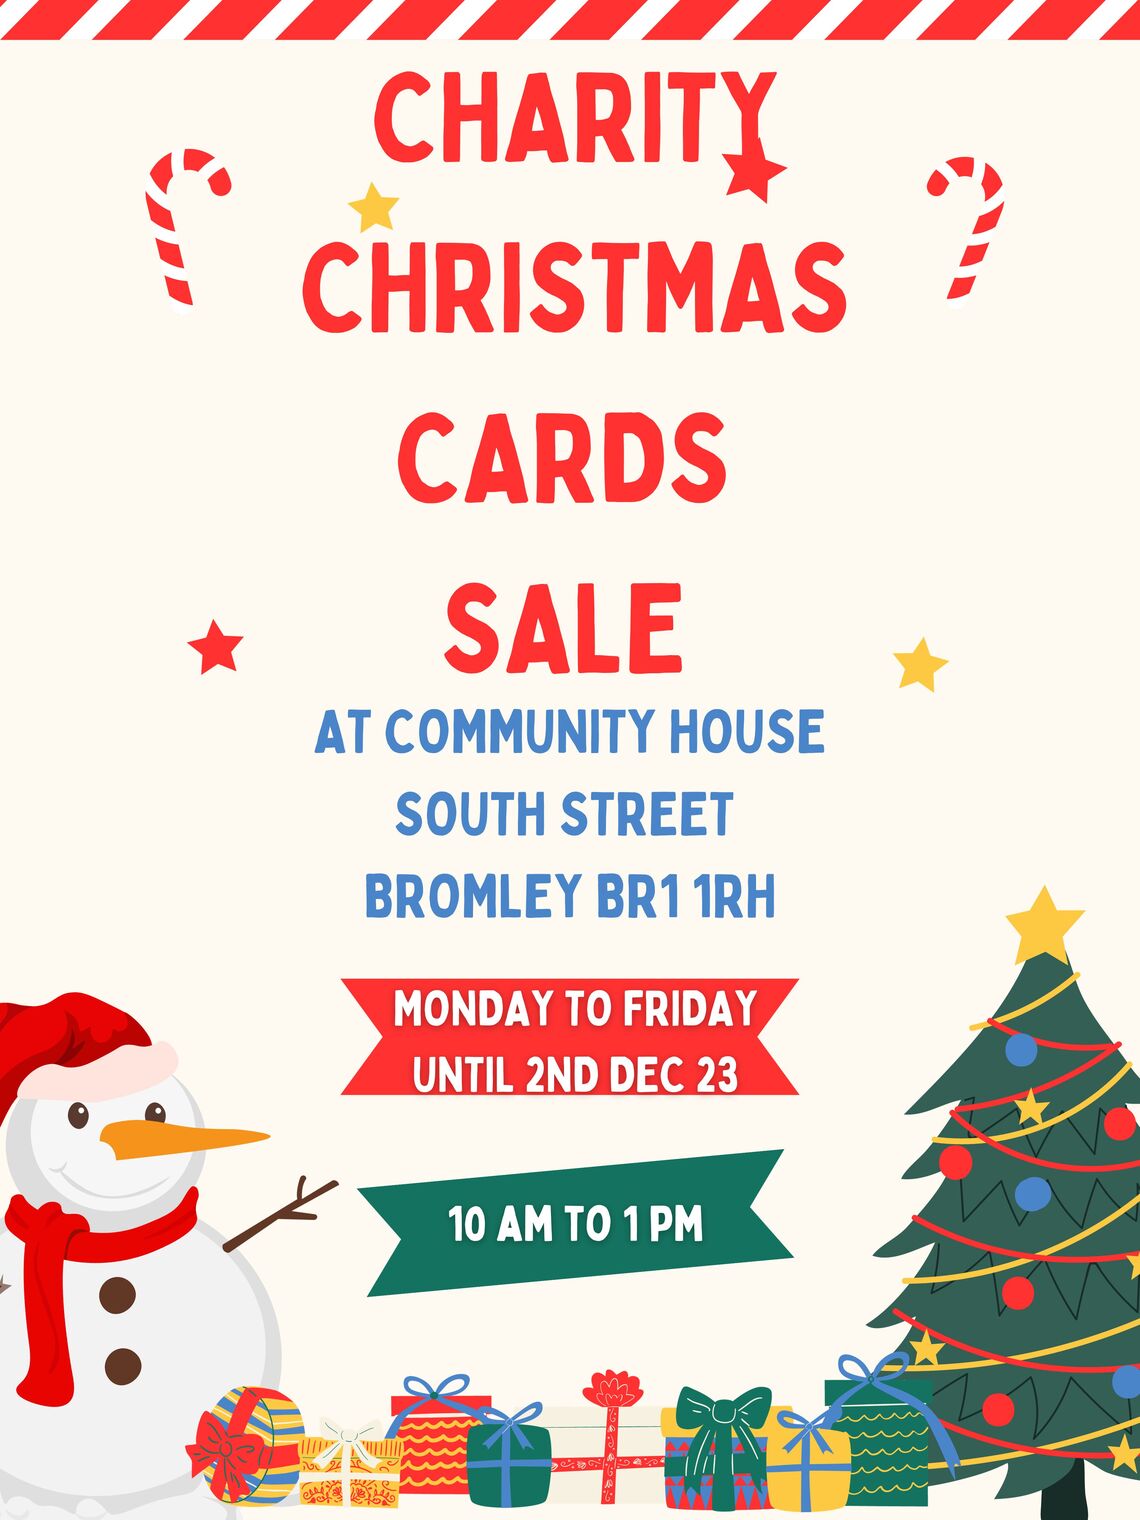 Charity Christmas Cards Sale 